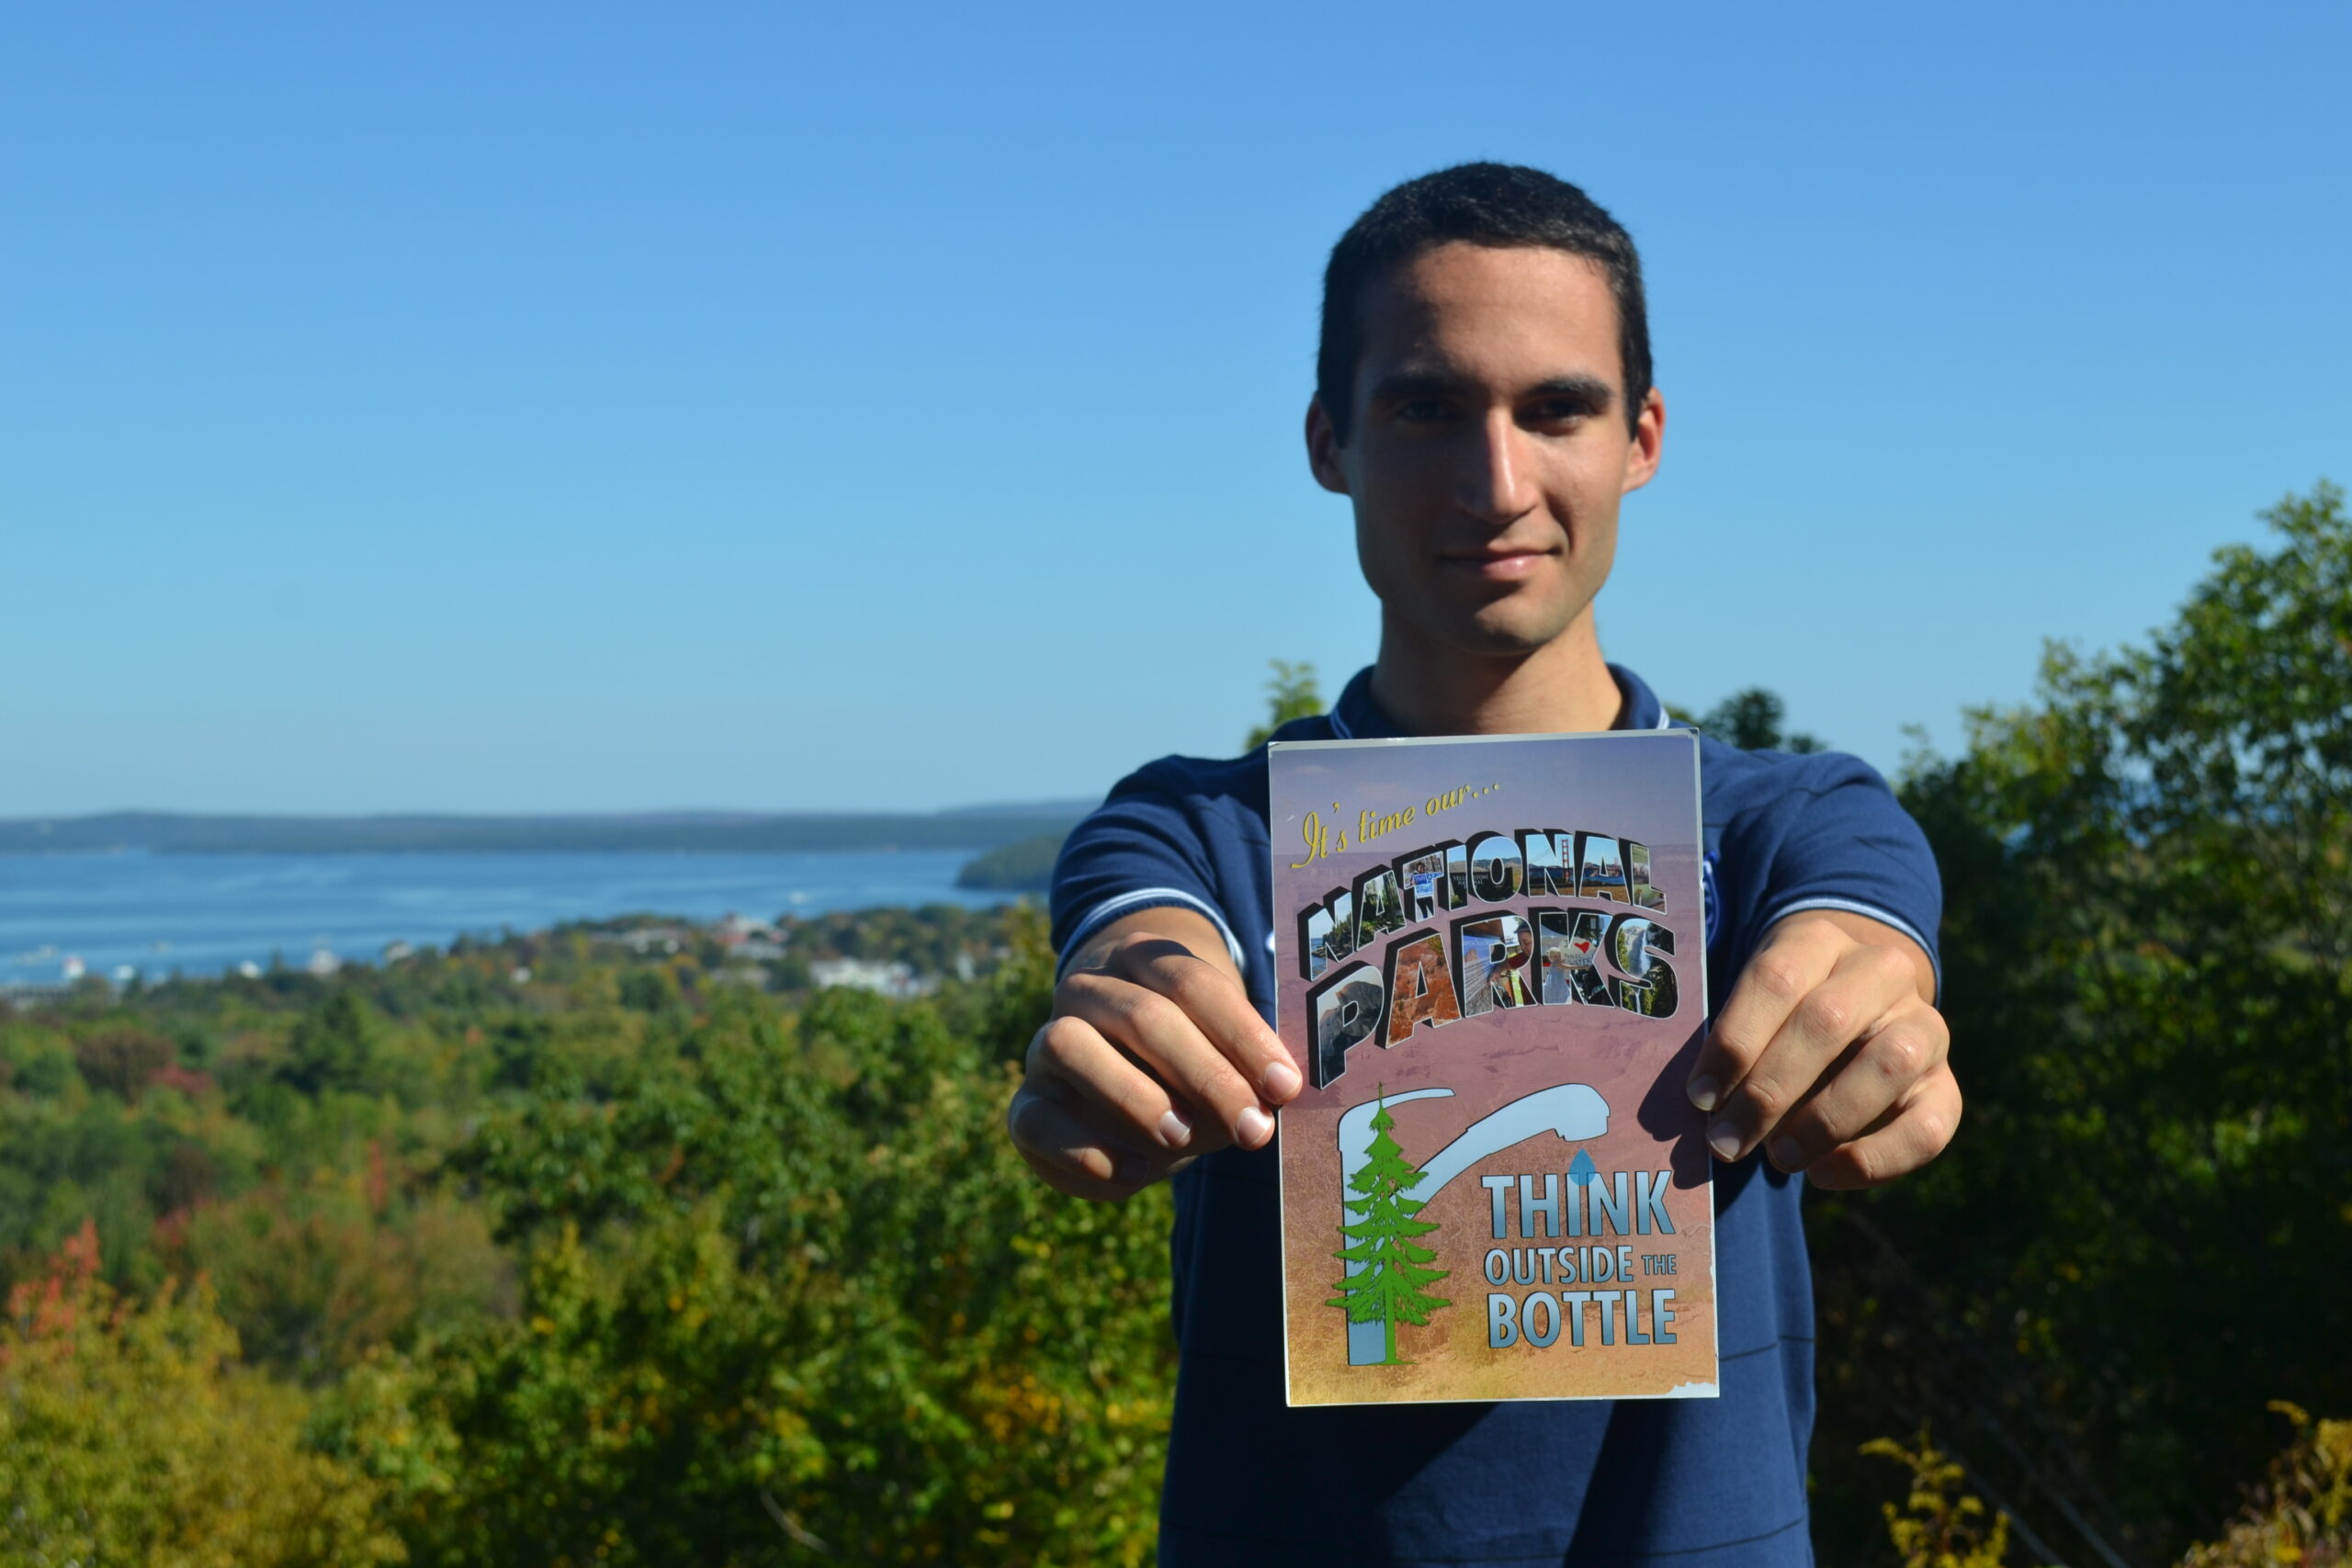 : Ari Rubenstein, a young white organizer with Corporate Accountability, holds a sign that says “National Parks Think Outside the Bottle.” He is high above the scenic background behind him--blue sky, ocean, and trees.